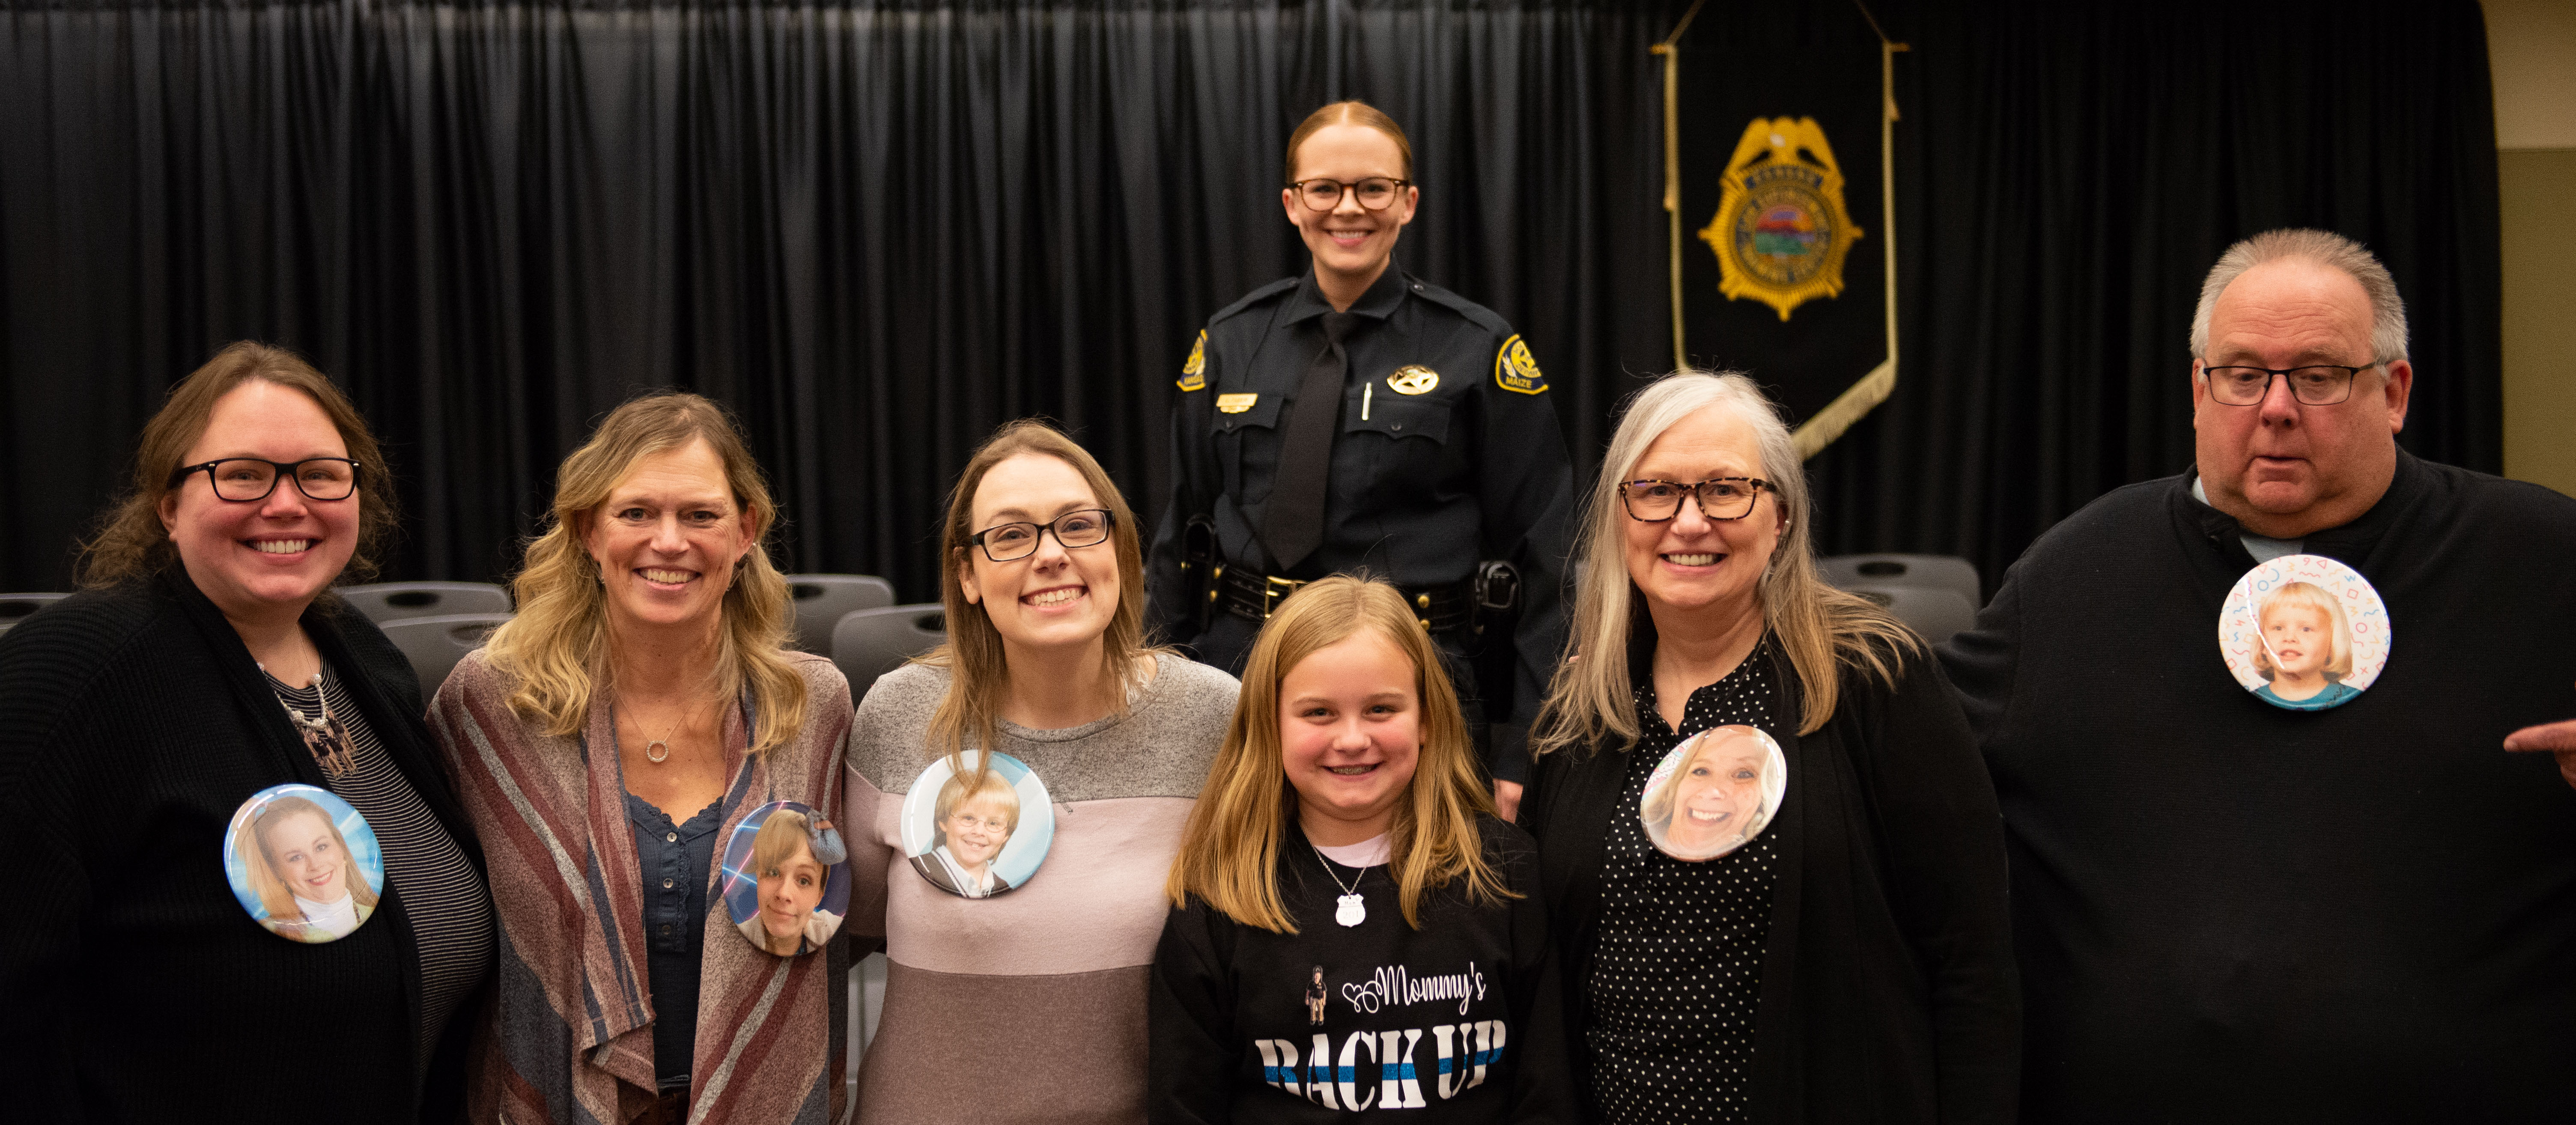 Officer and family photo